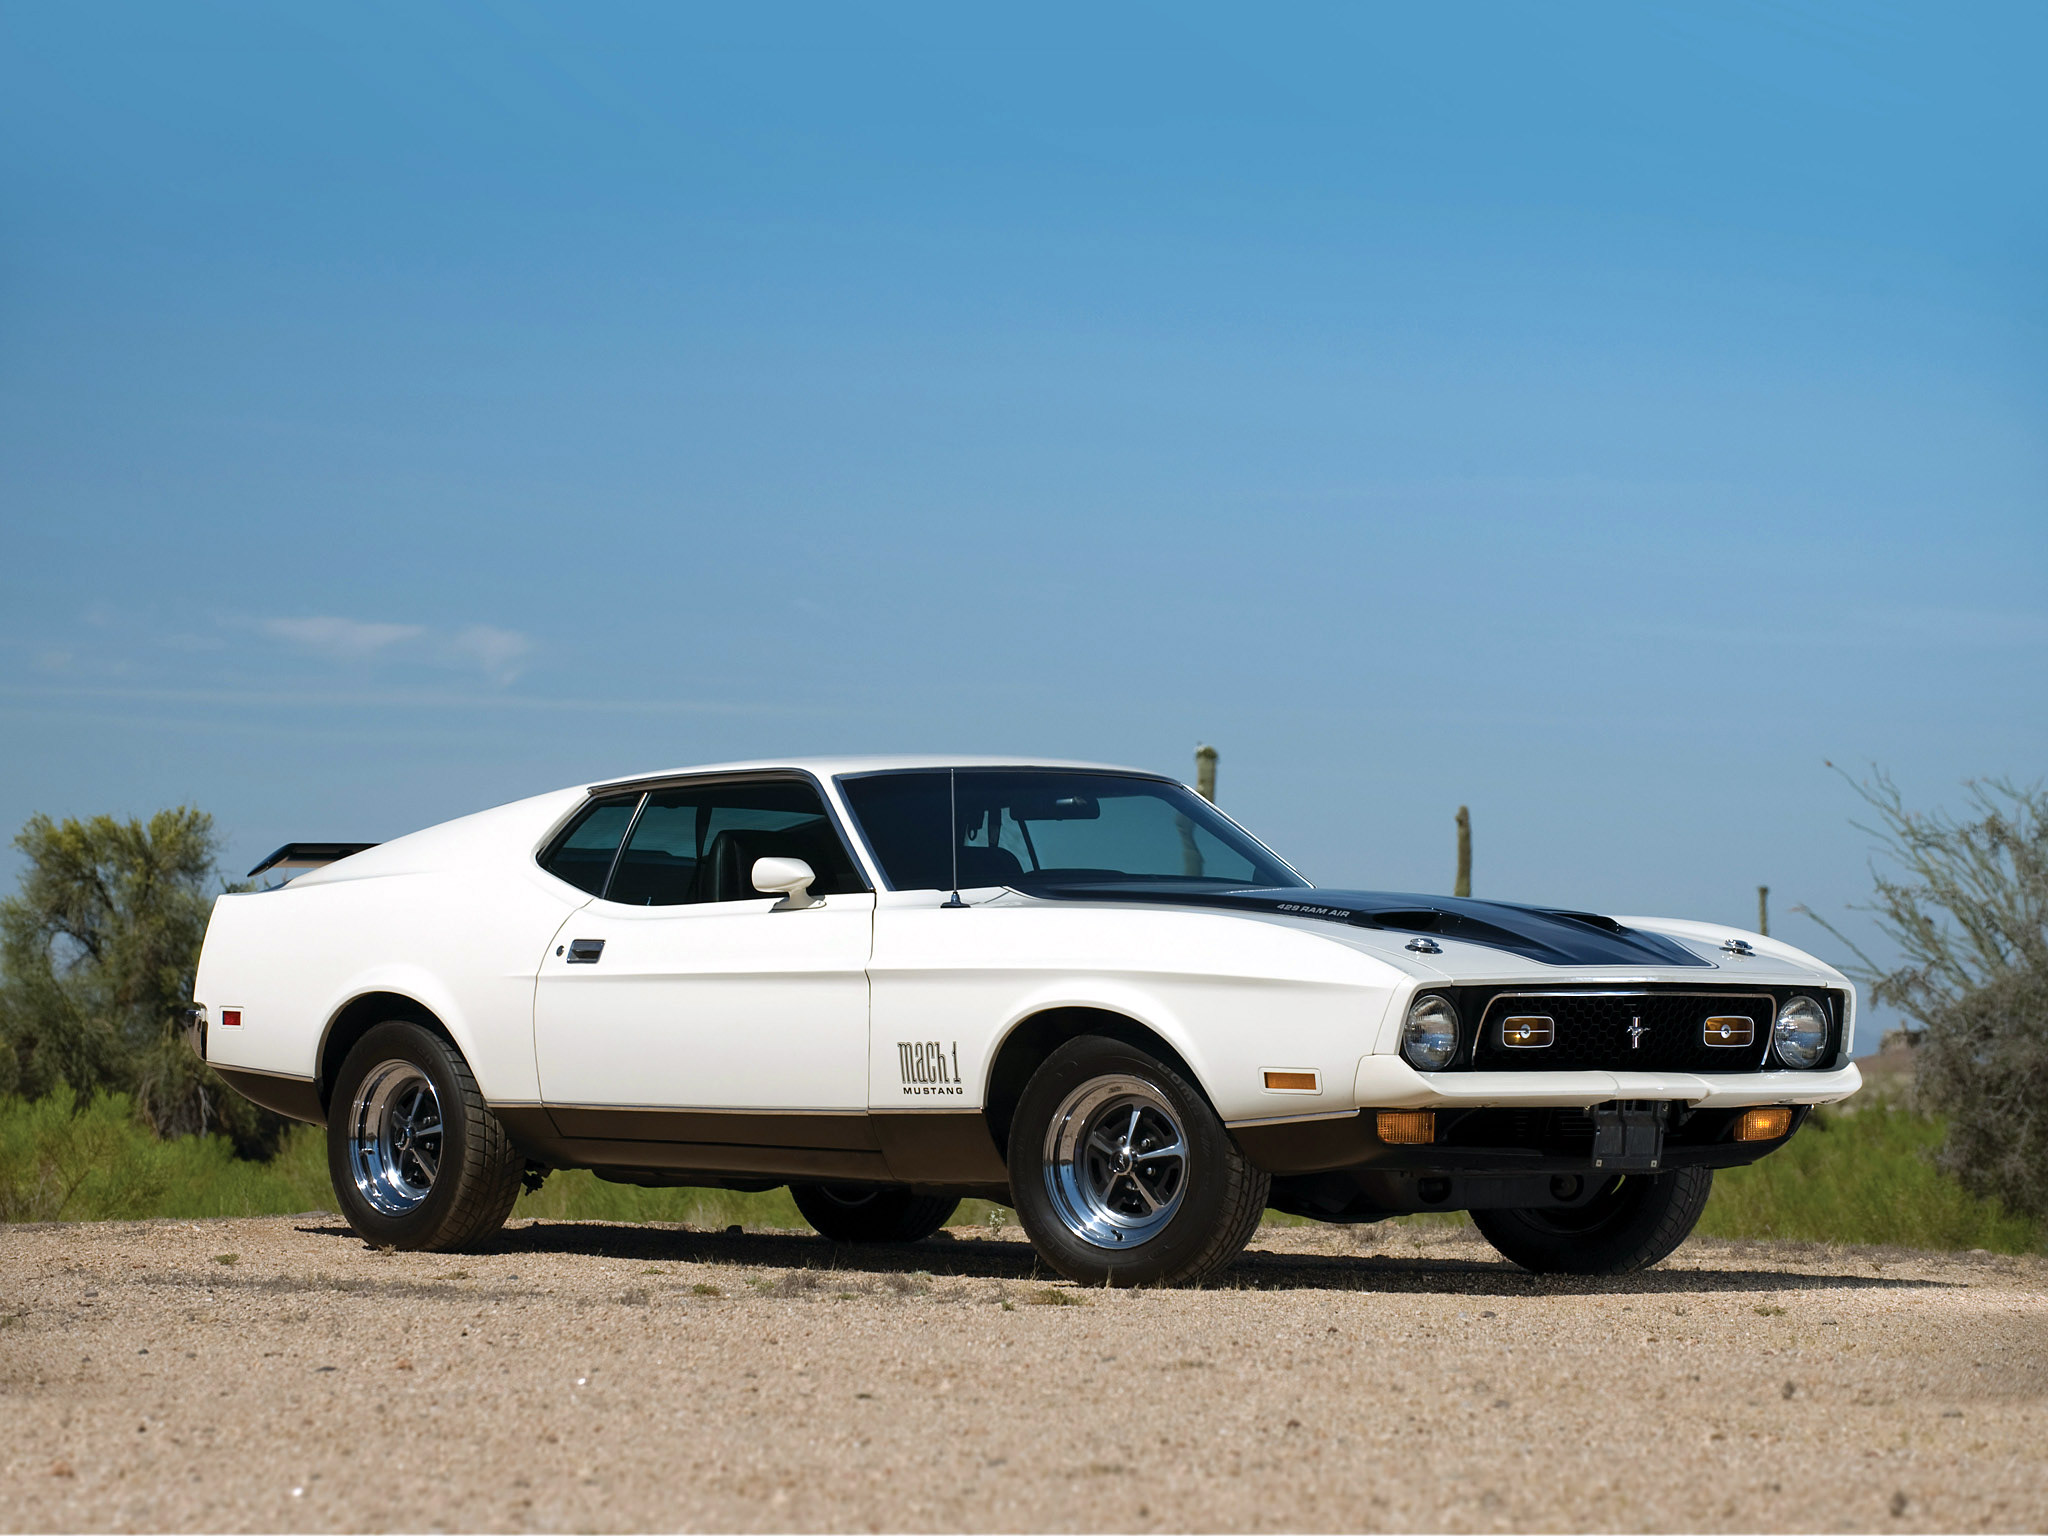 Mustang Of The Day: 1972 Ford Mustang Mach 1